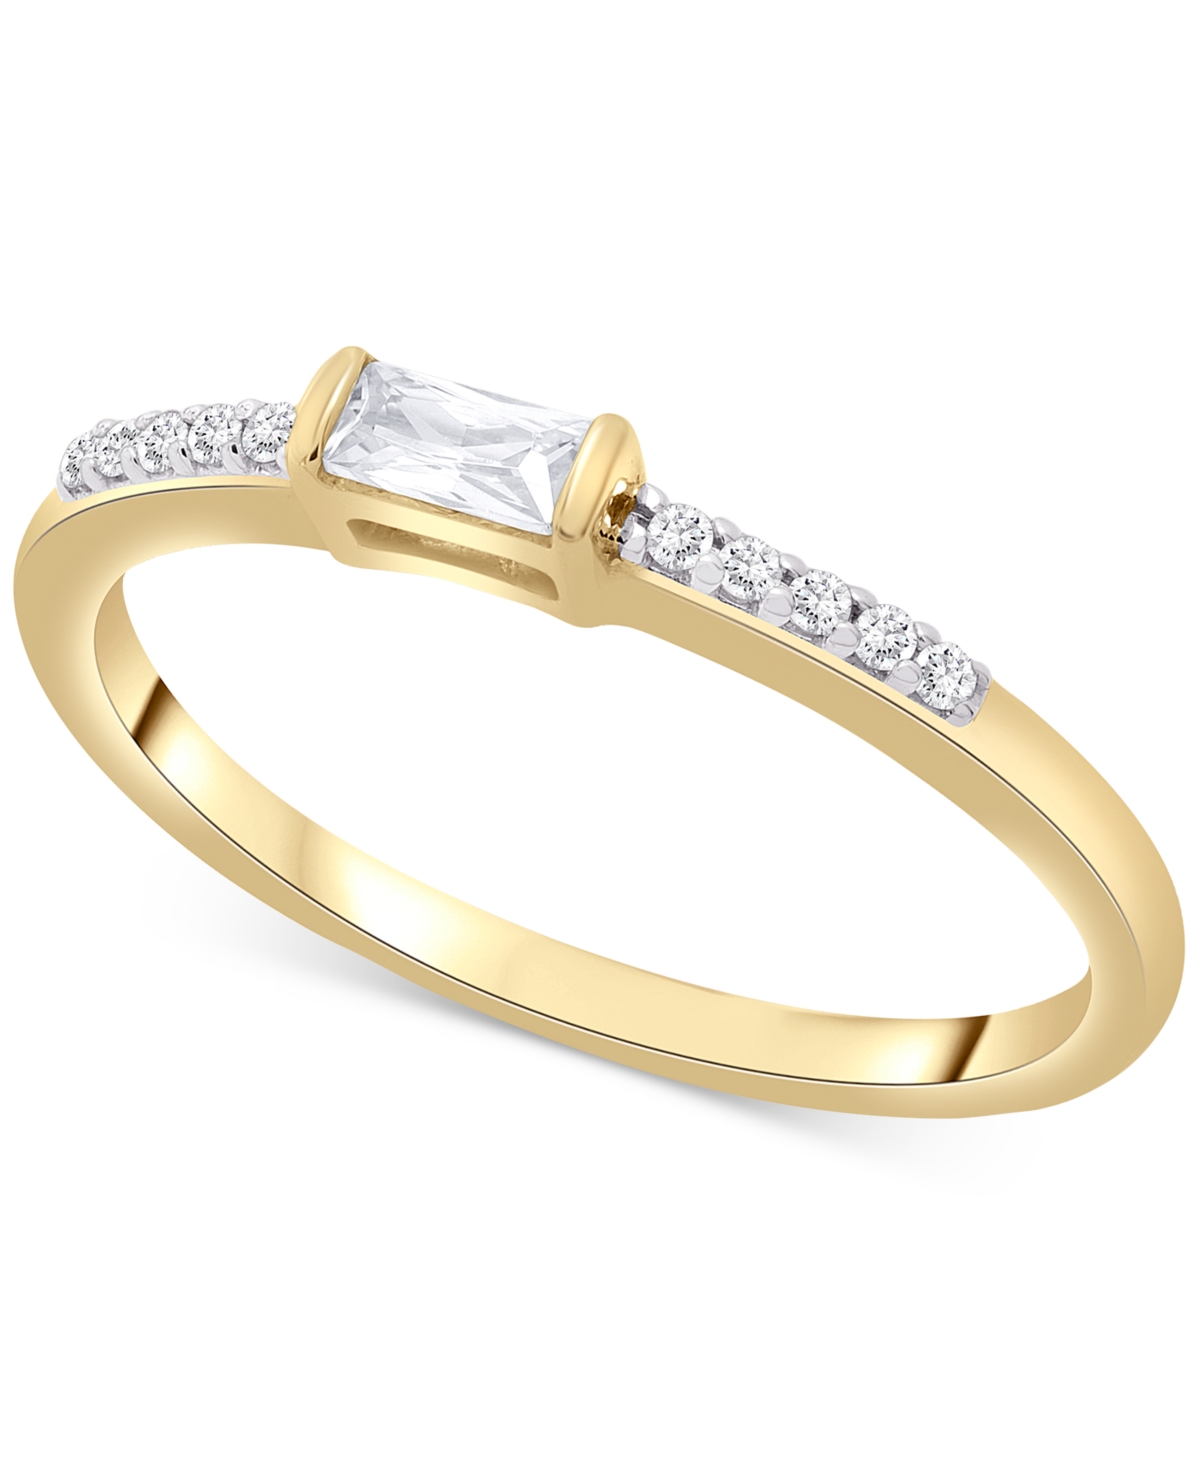 Certified Diamond Baguette Ring (1/6 ct. t.w.) in 14k Gold, Created for Macy's - Yellow Gold